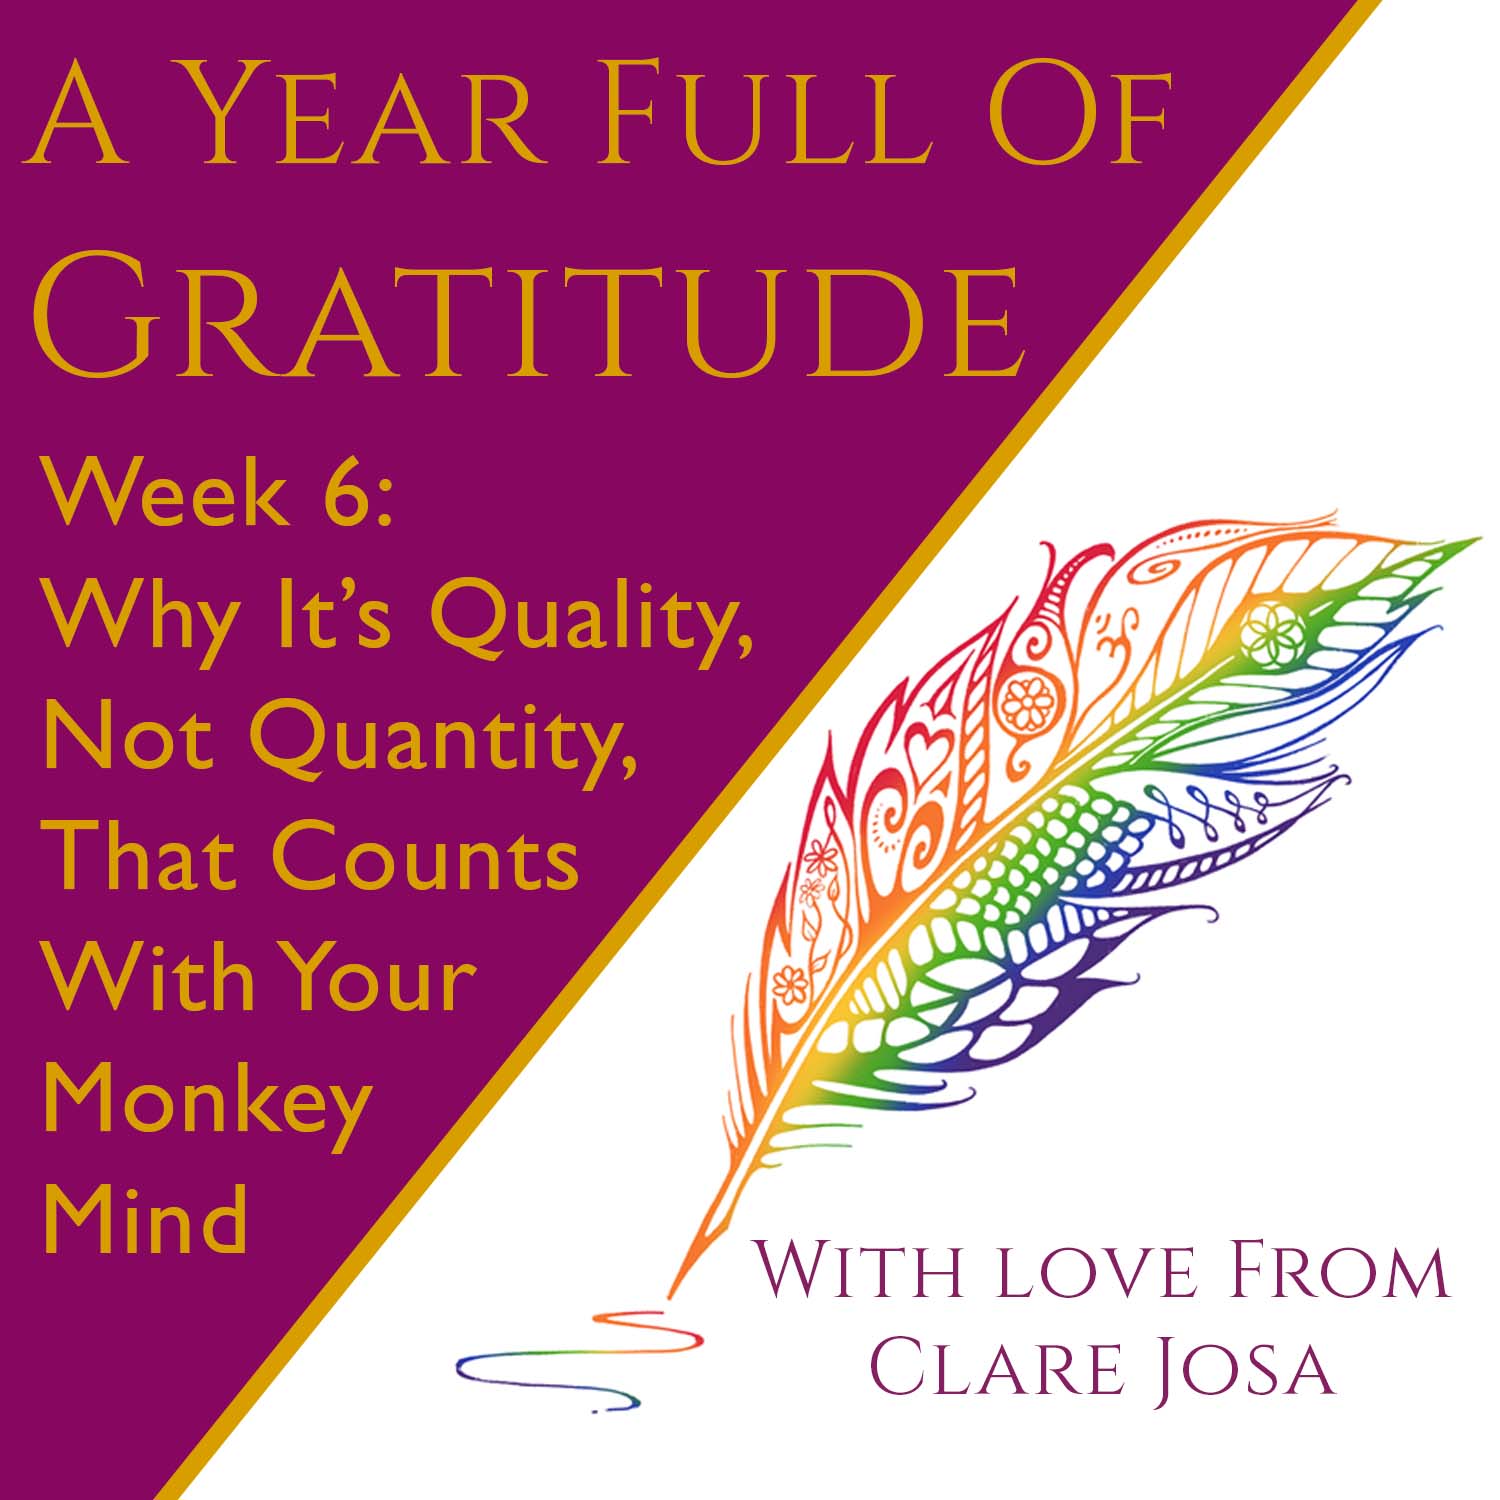 Gratitude Week 6: Why it's quality, not quantity, that counts for your monkey mind